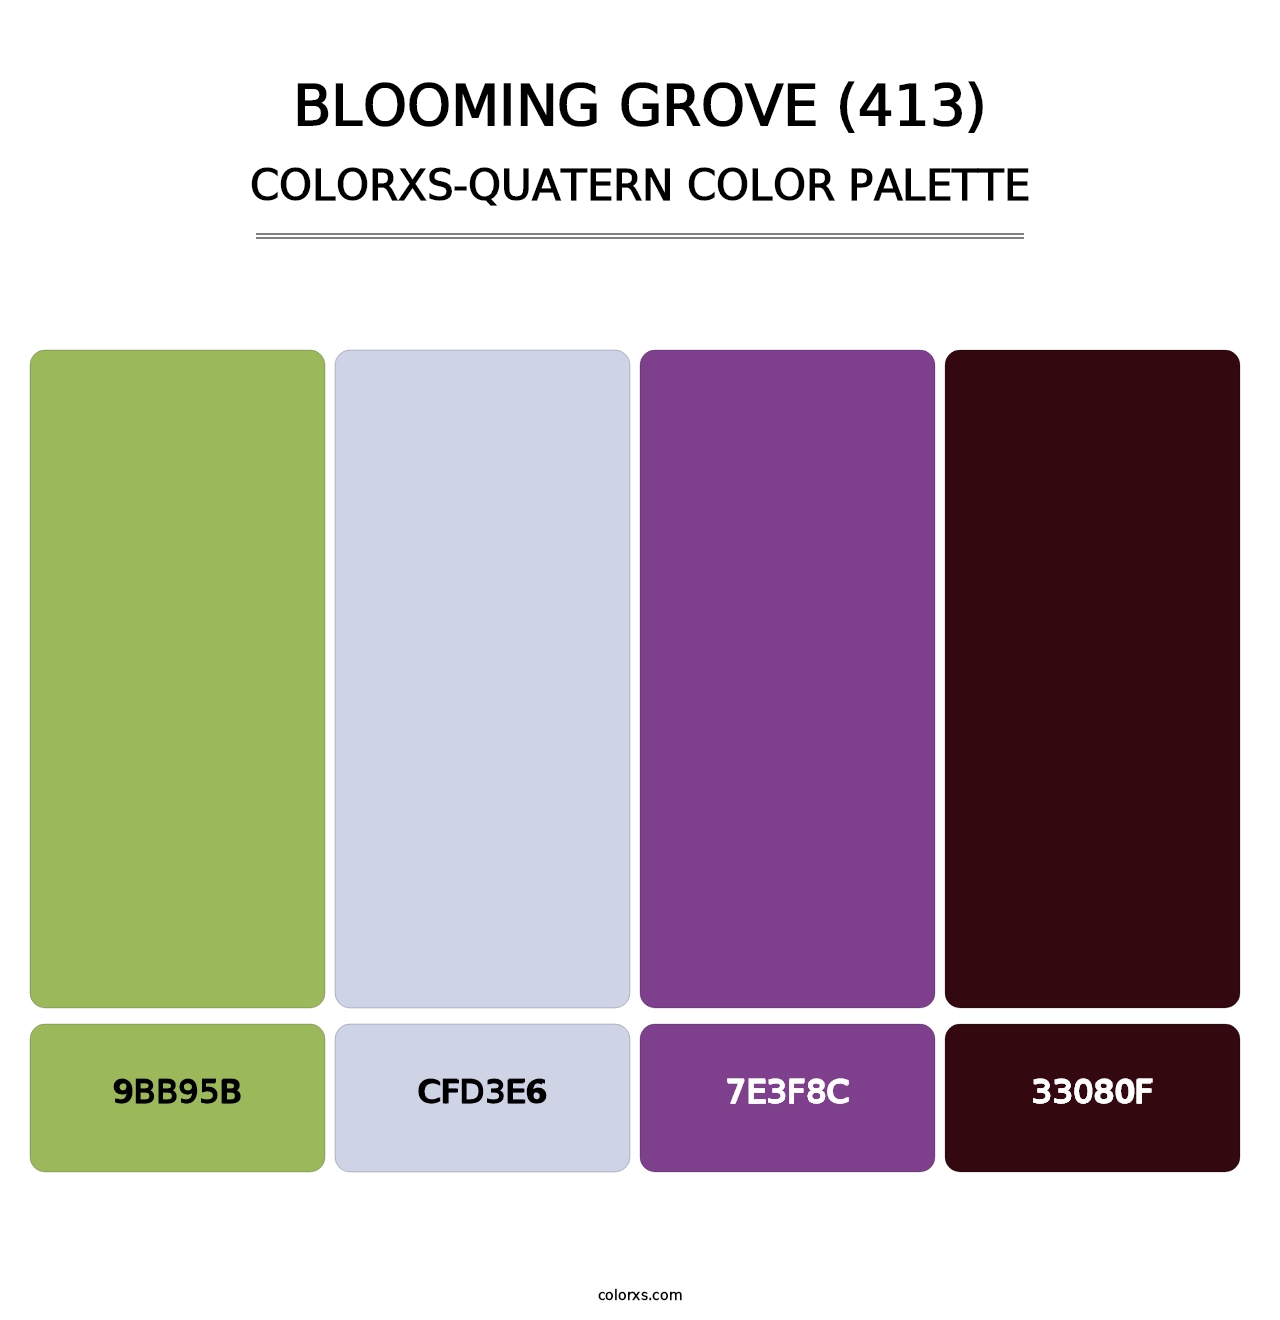 Blooming Grove (413) - Colorxs Quatern Palette